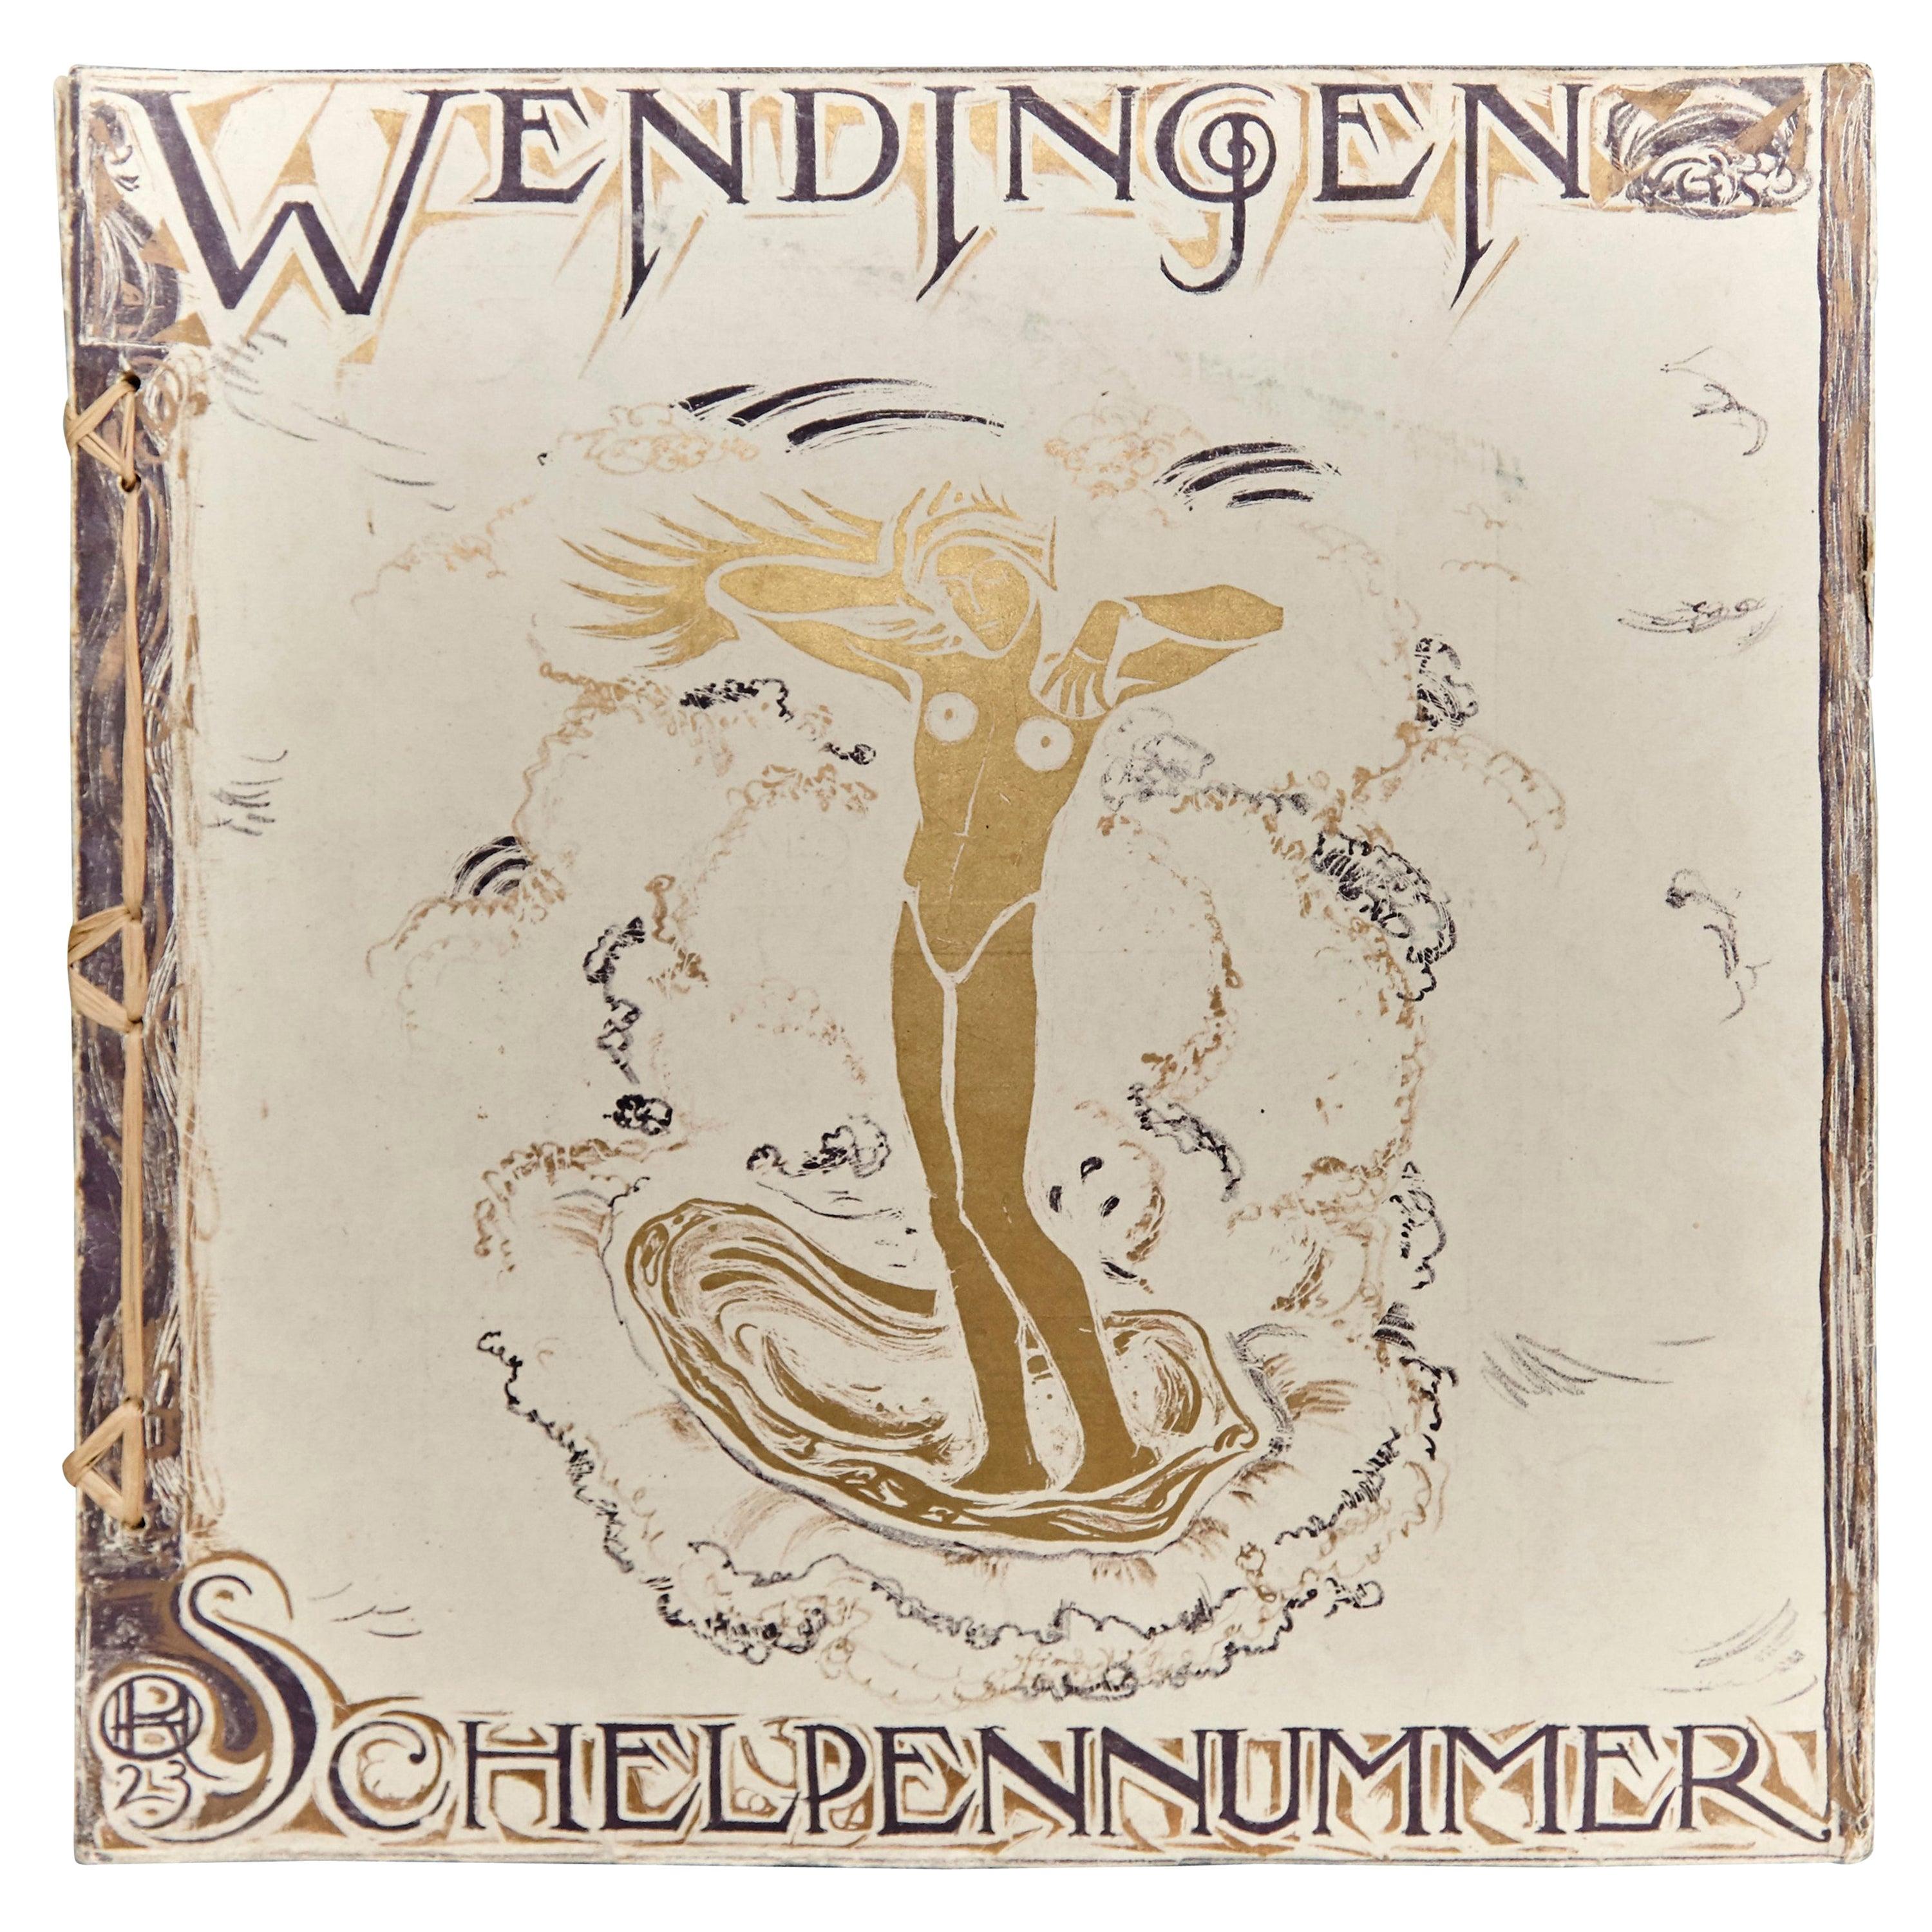 Wendingen, Issue 8/9, Cover by R.N. Roland Holst, 1923 For Sale